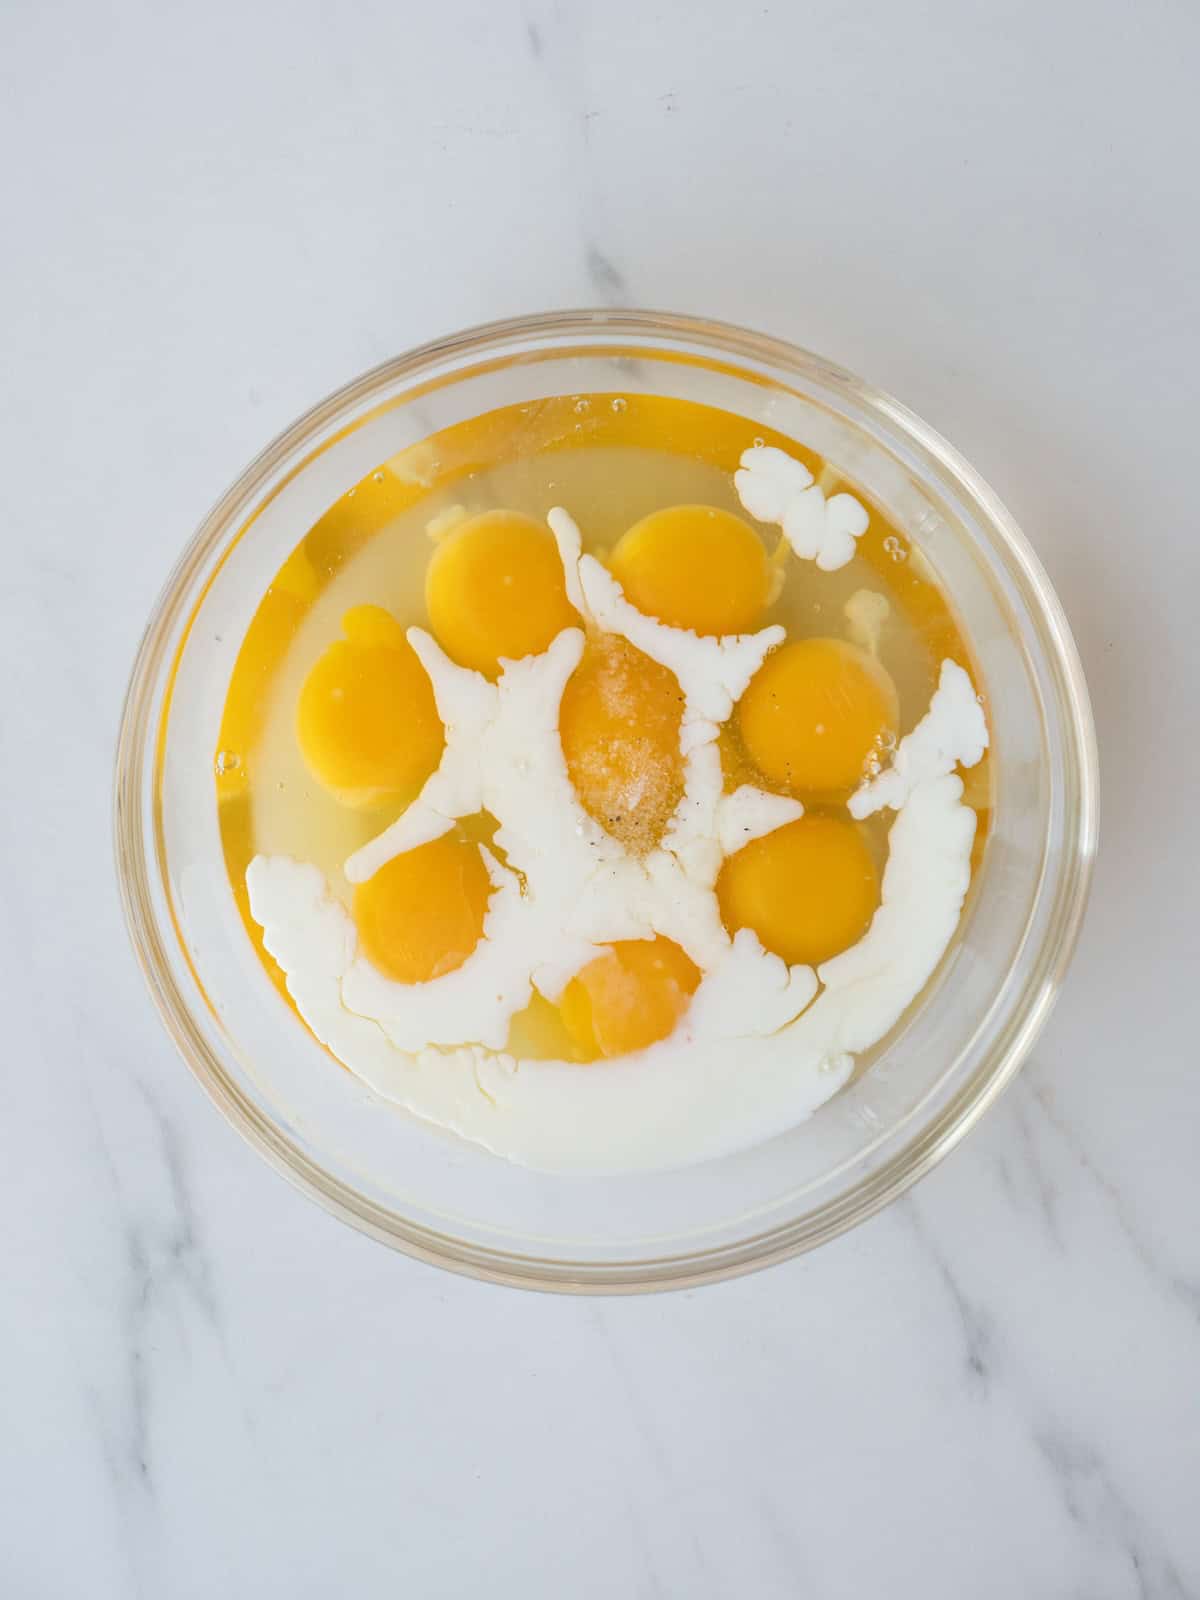 A glass mixing bowl with cracked eggs, milk and a pinch of salt.